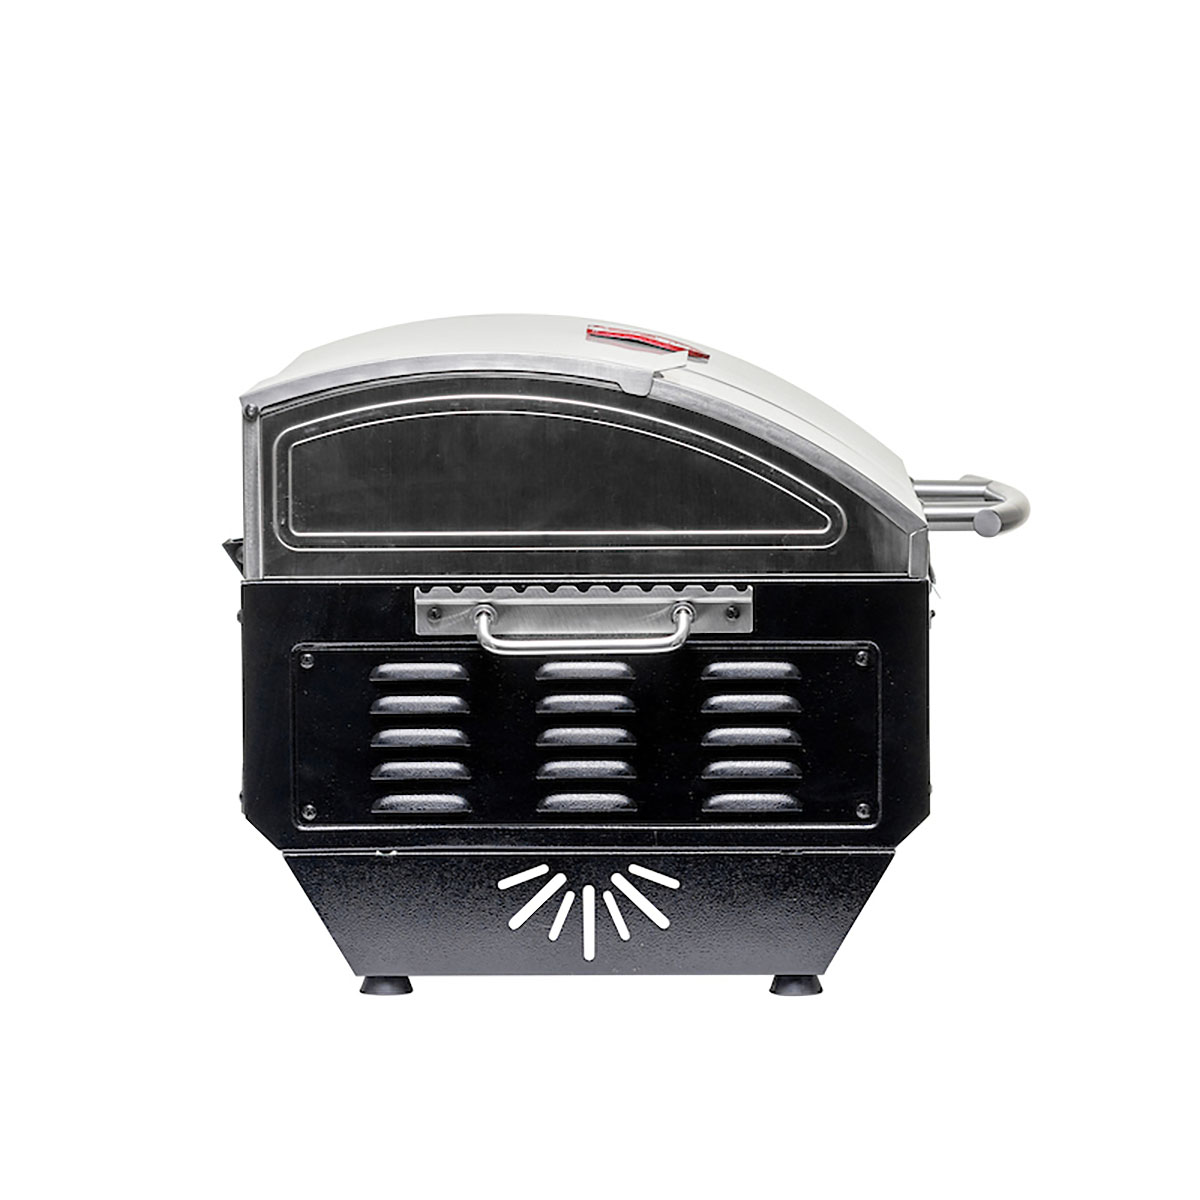 Buffalo Outdoor Pwpg256 Portable Electric Start Wood Pellet Grill, Green